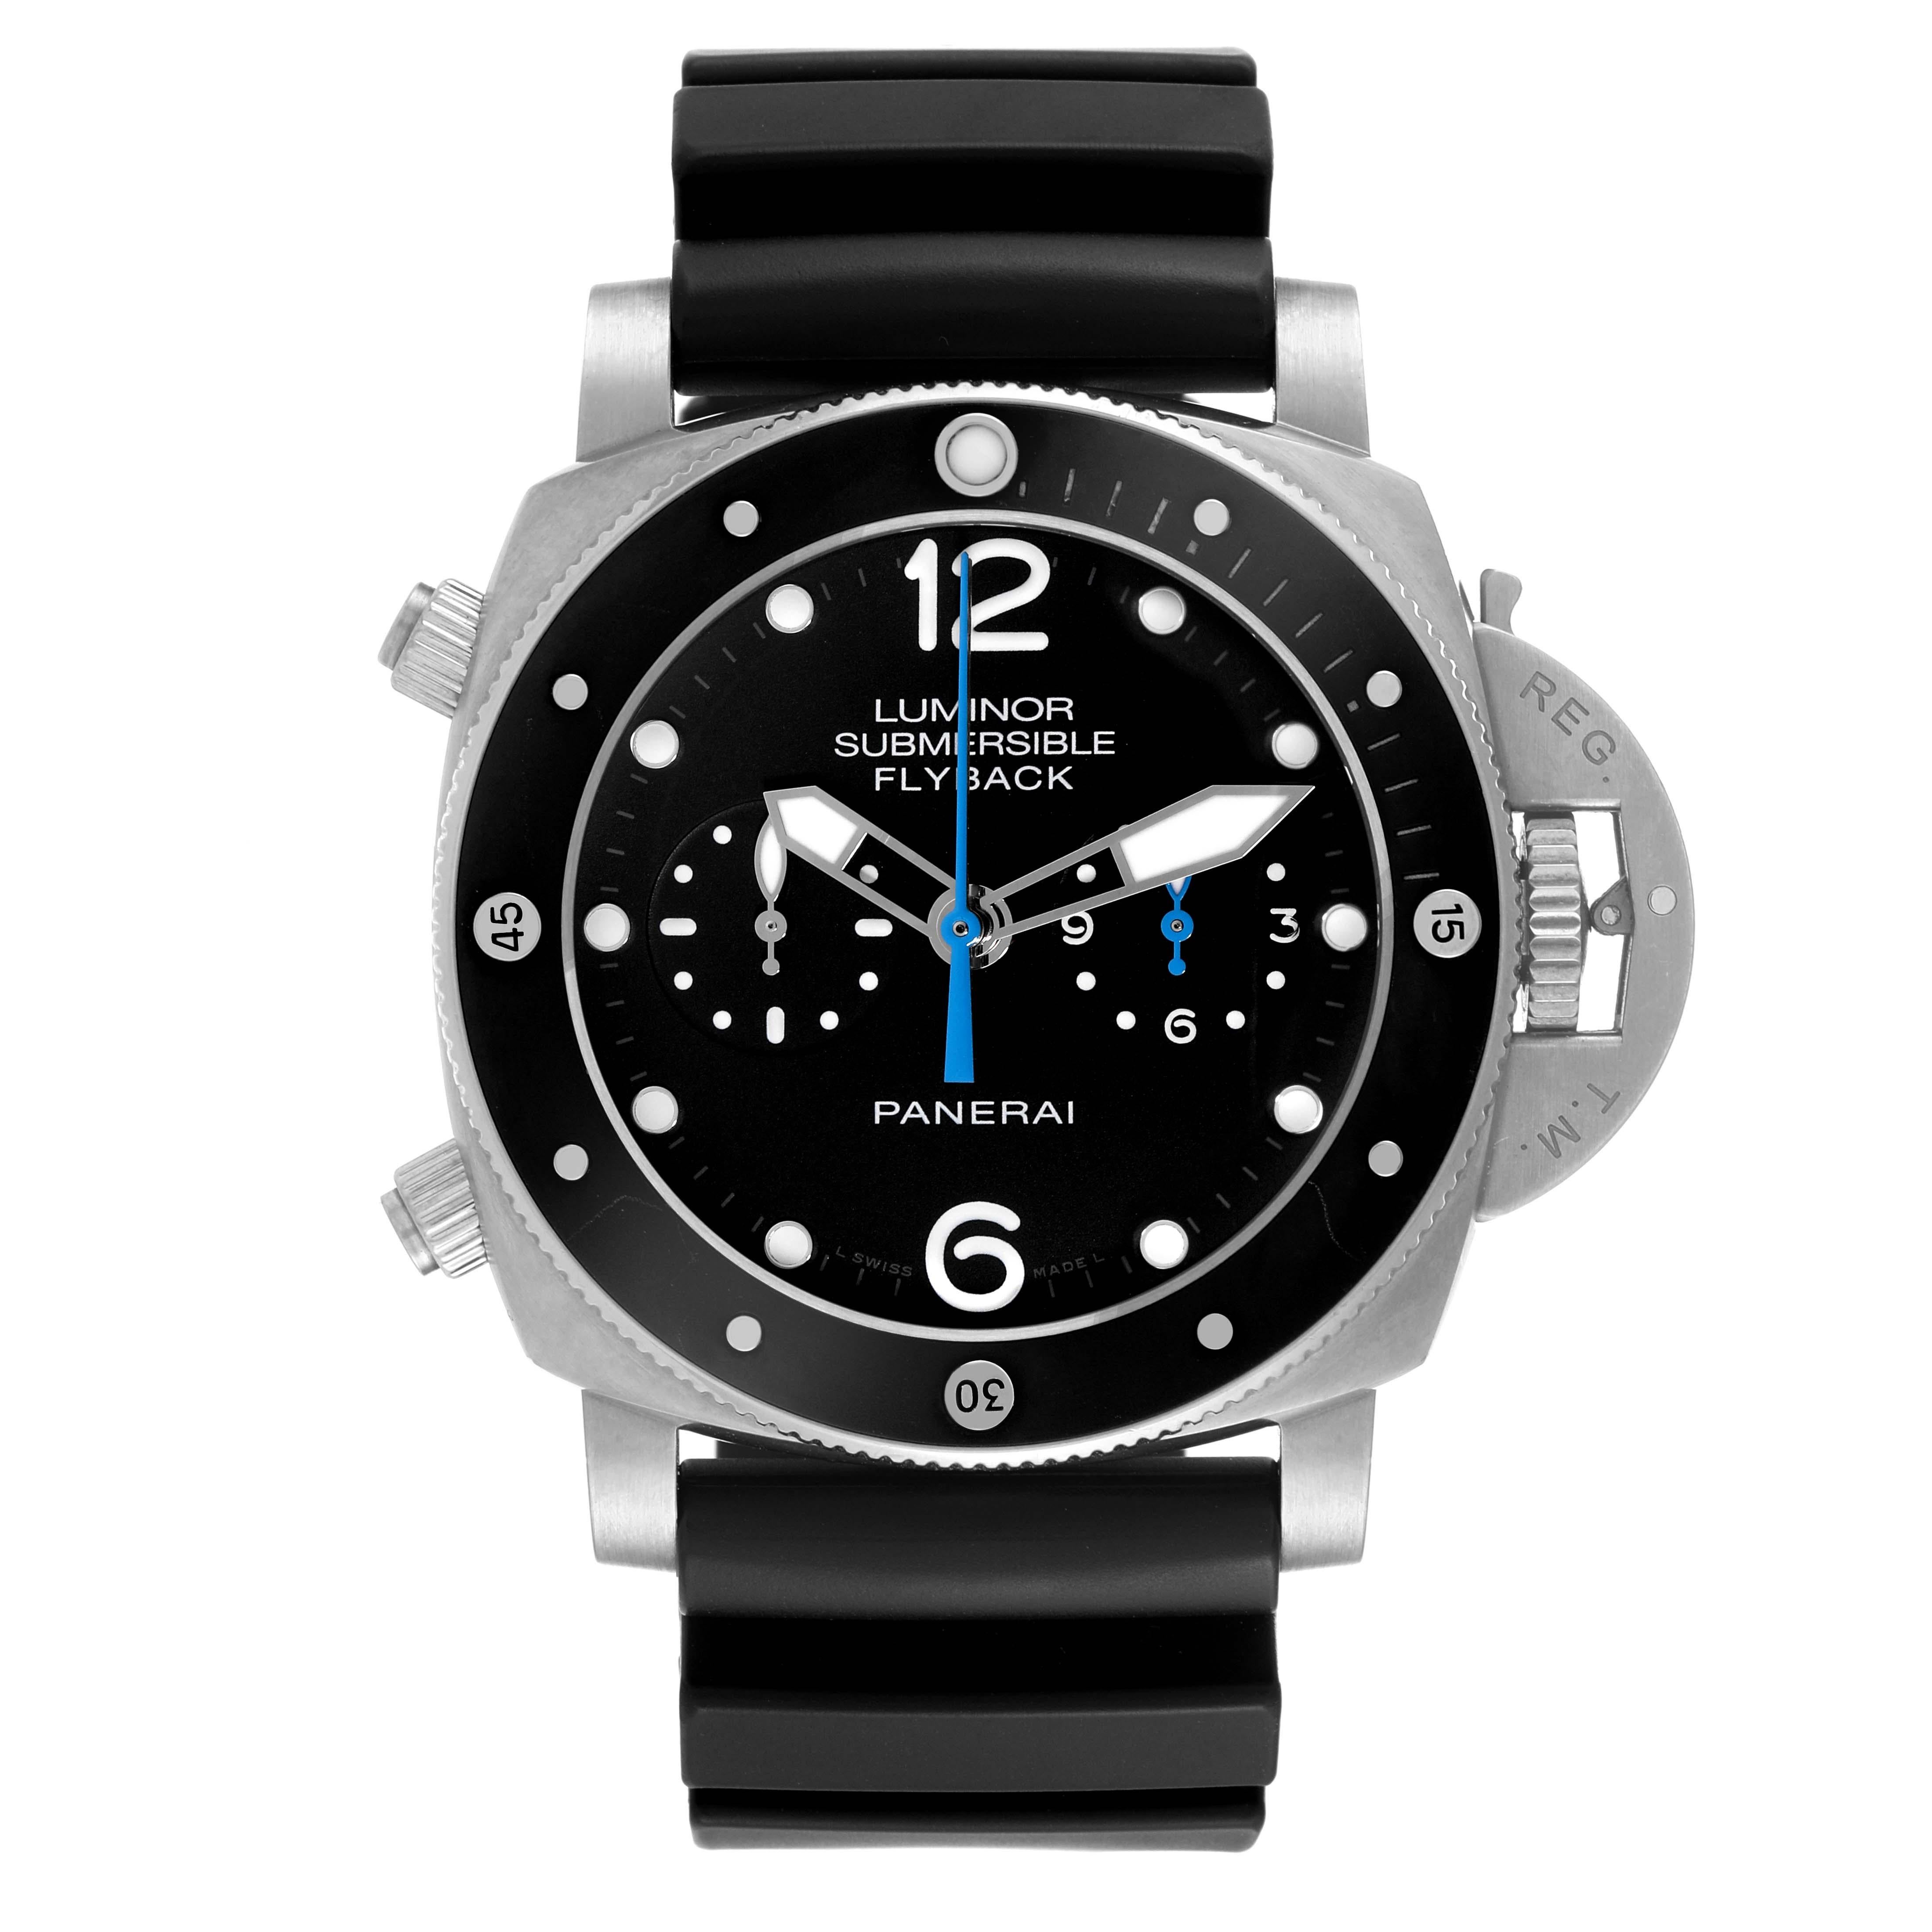 Panerai Luminor Submersible 3 Days Flyback Titanium Mens Watch PAM00615 Papers. Automatic self-winding chronograph movement. Two part cushion shaped titanium case 47.0 mm in diameter. Panerai patented crown protector. Unidirectional rotating